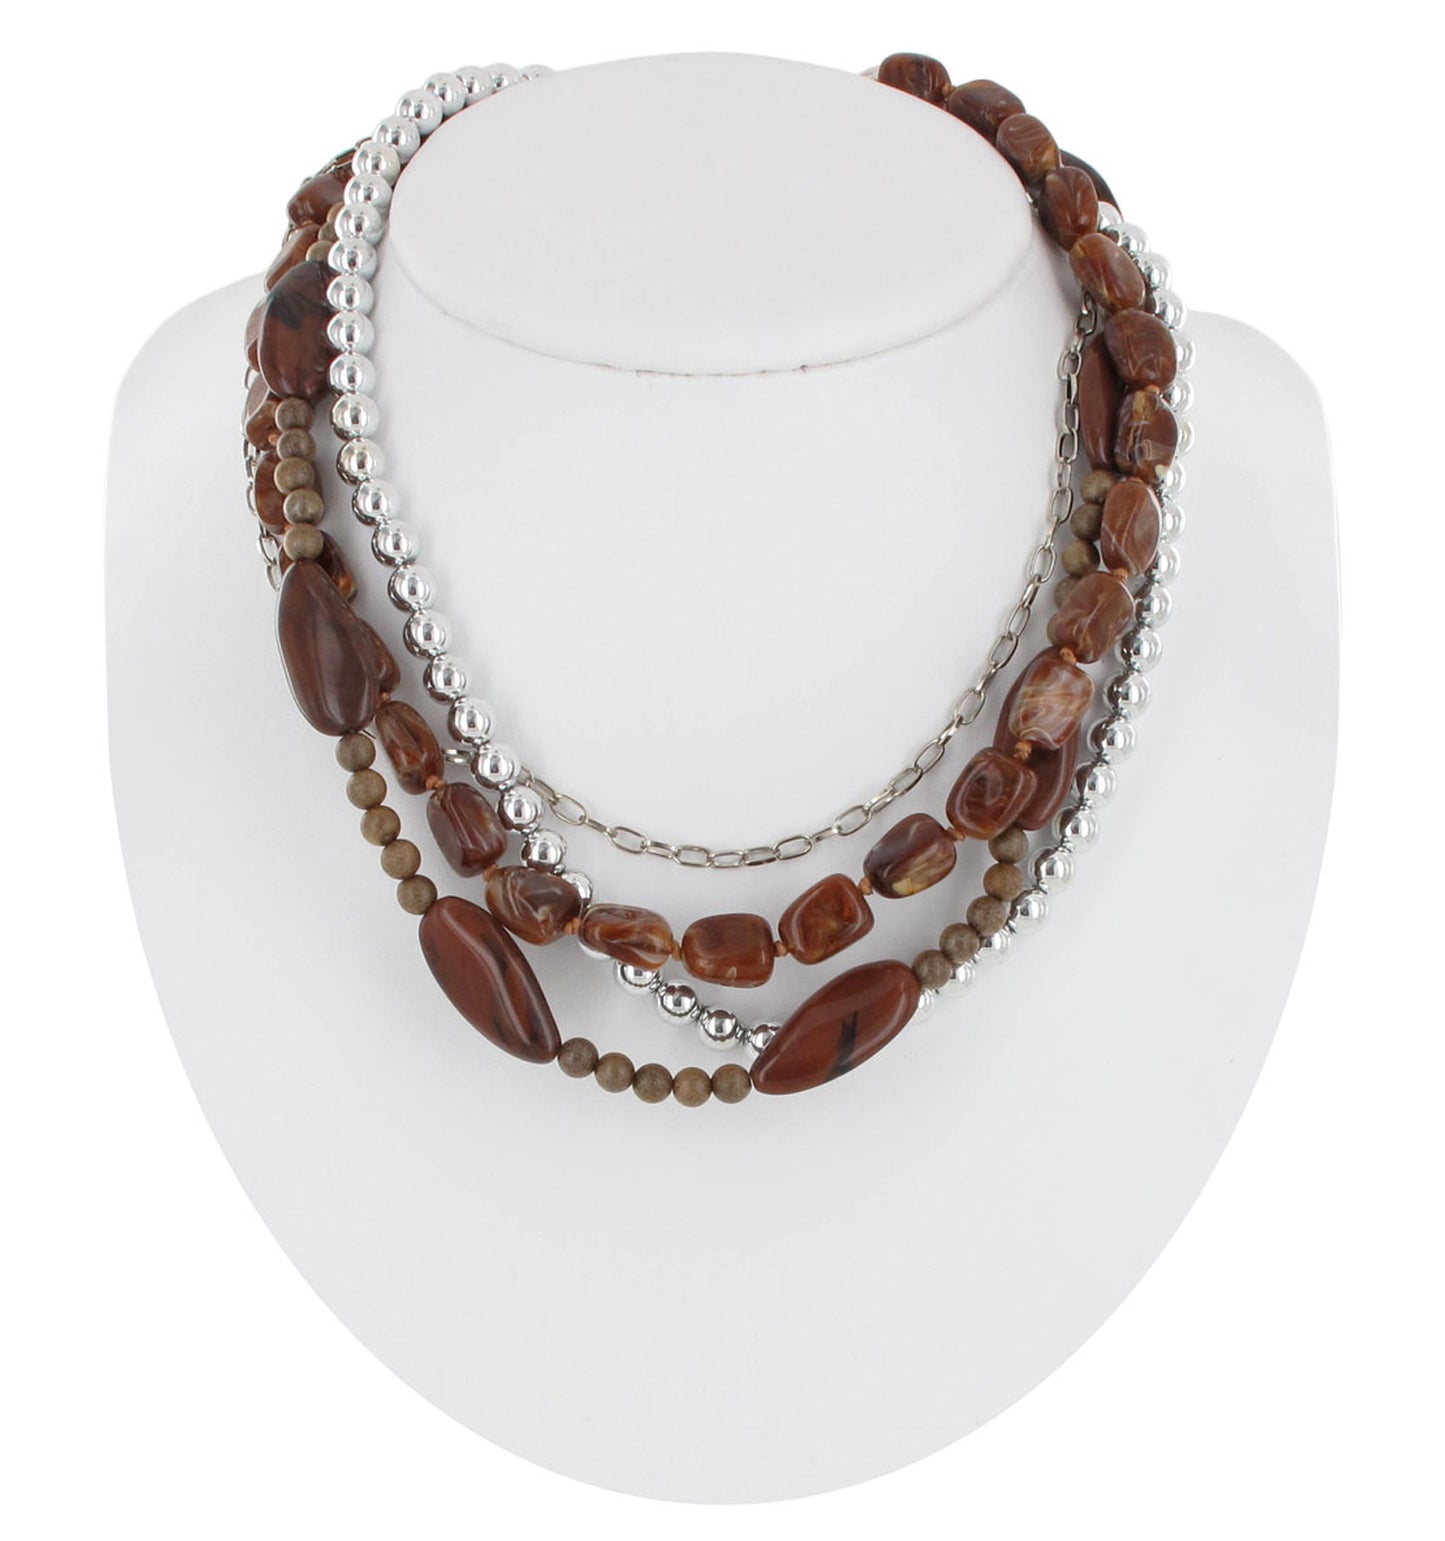 Multistrand Necklace Faux Stone Brown Lucite Bead Chain Silver Tone 19-21.5"